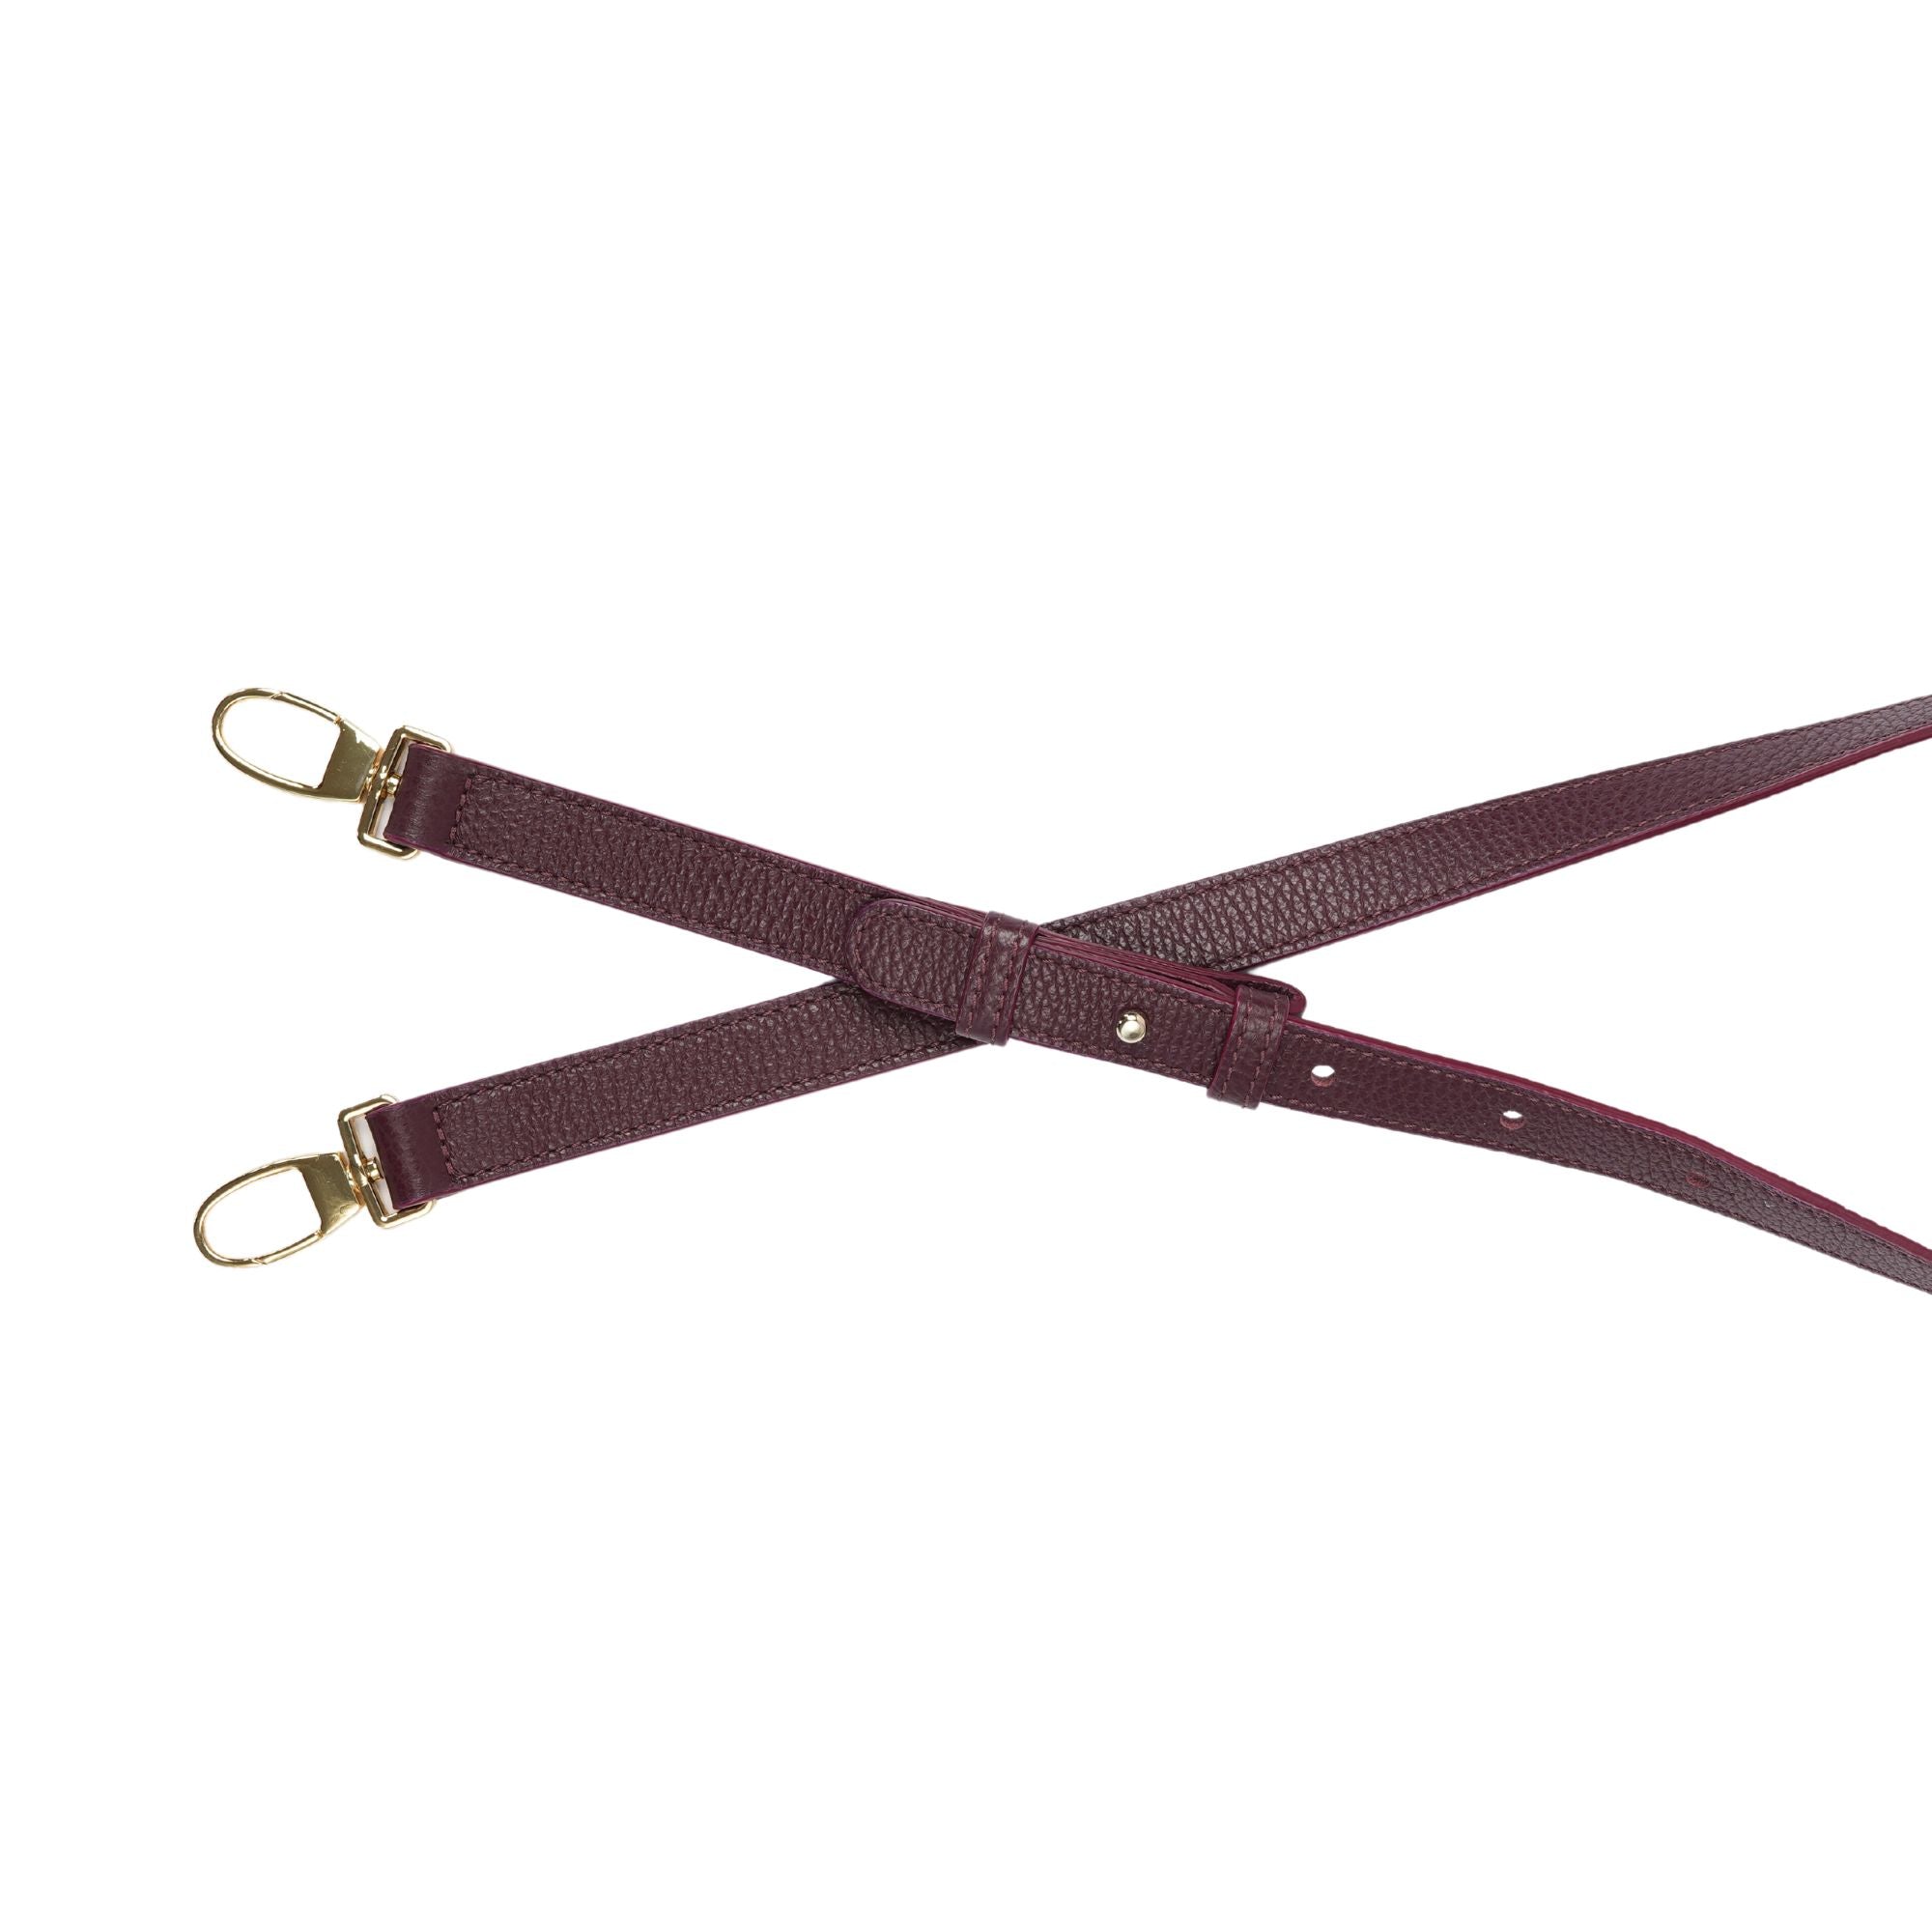 AMELI Zurich | LEATHER STRAP | Maroon Red | Soft Grain Leather | Front